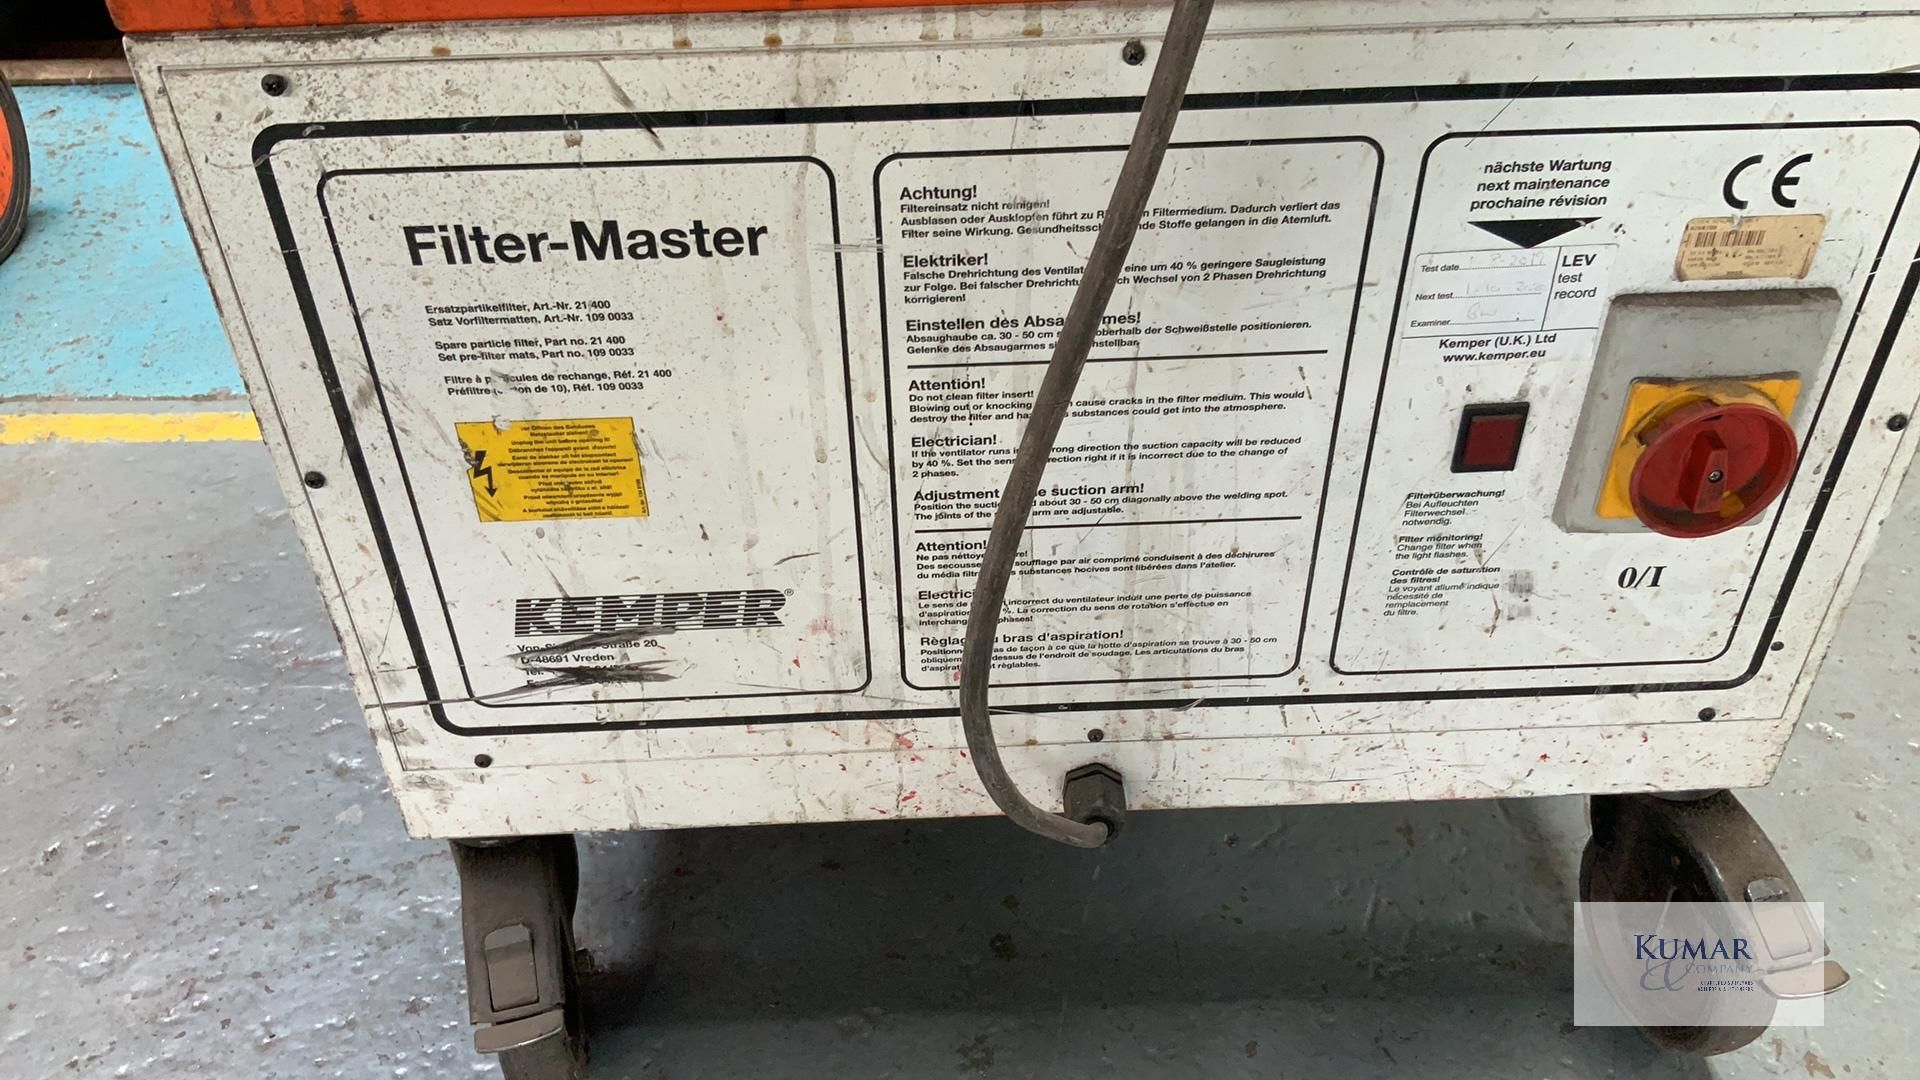 Kemper Filter Master, Type 64121 Mobile Fume Extraction Unit, Weight 80Kg, Serial No.258169, (04/ - Image 5 of 9